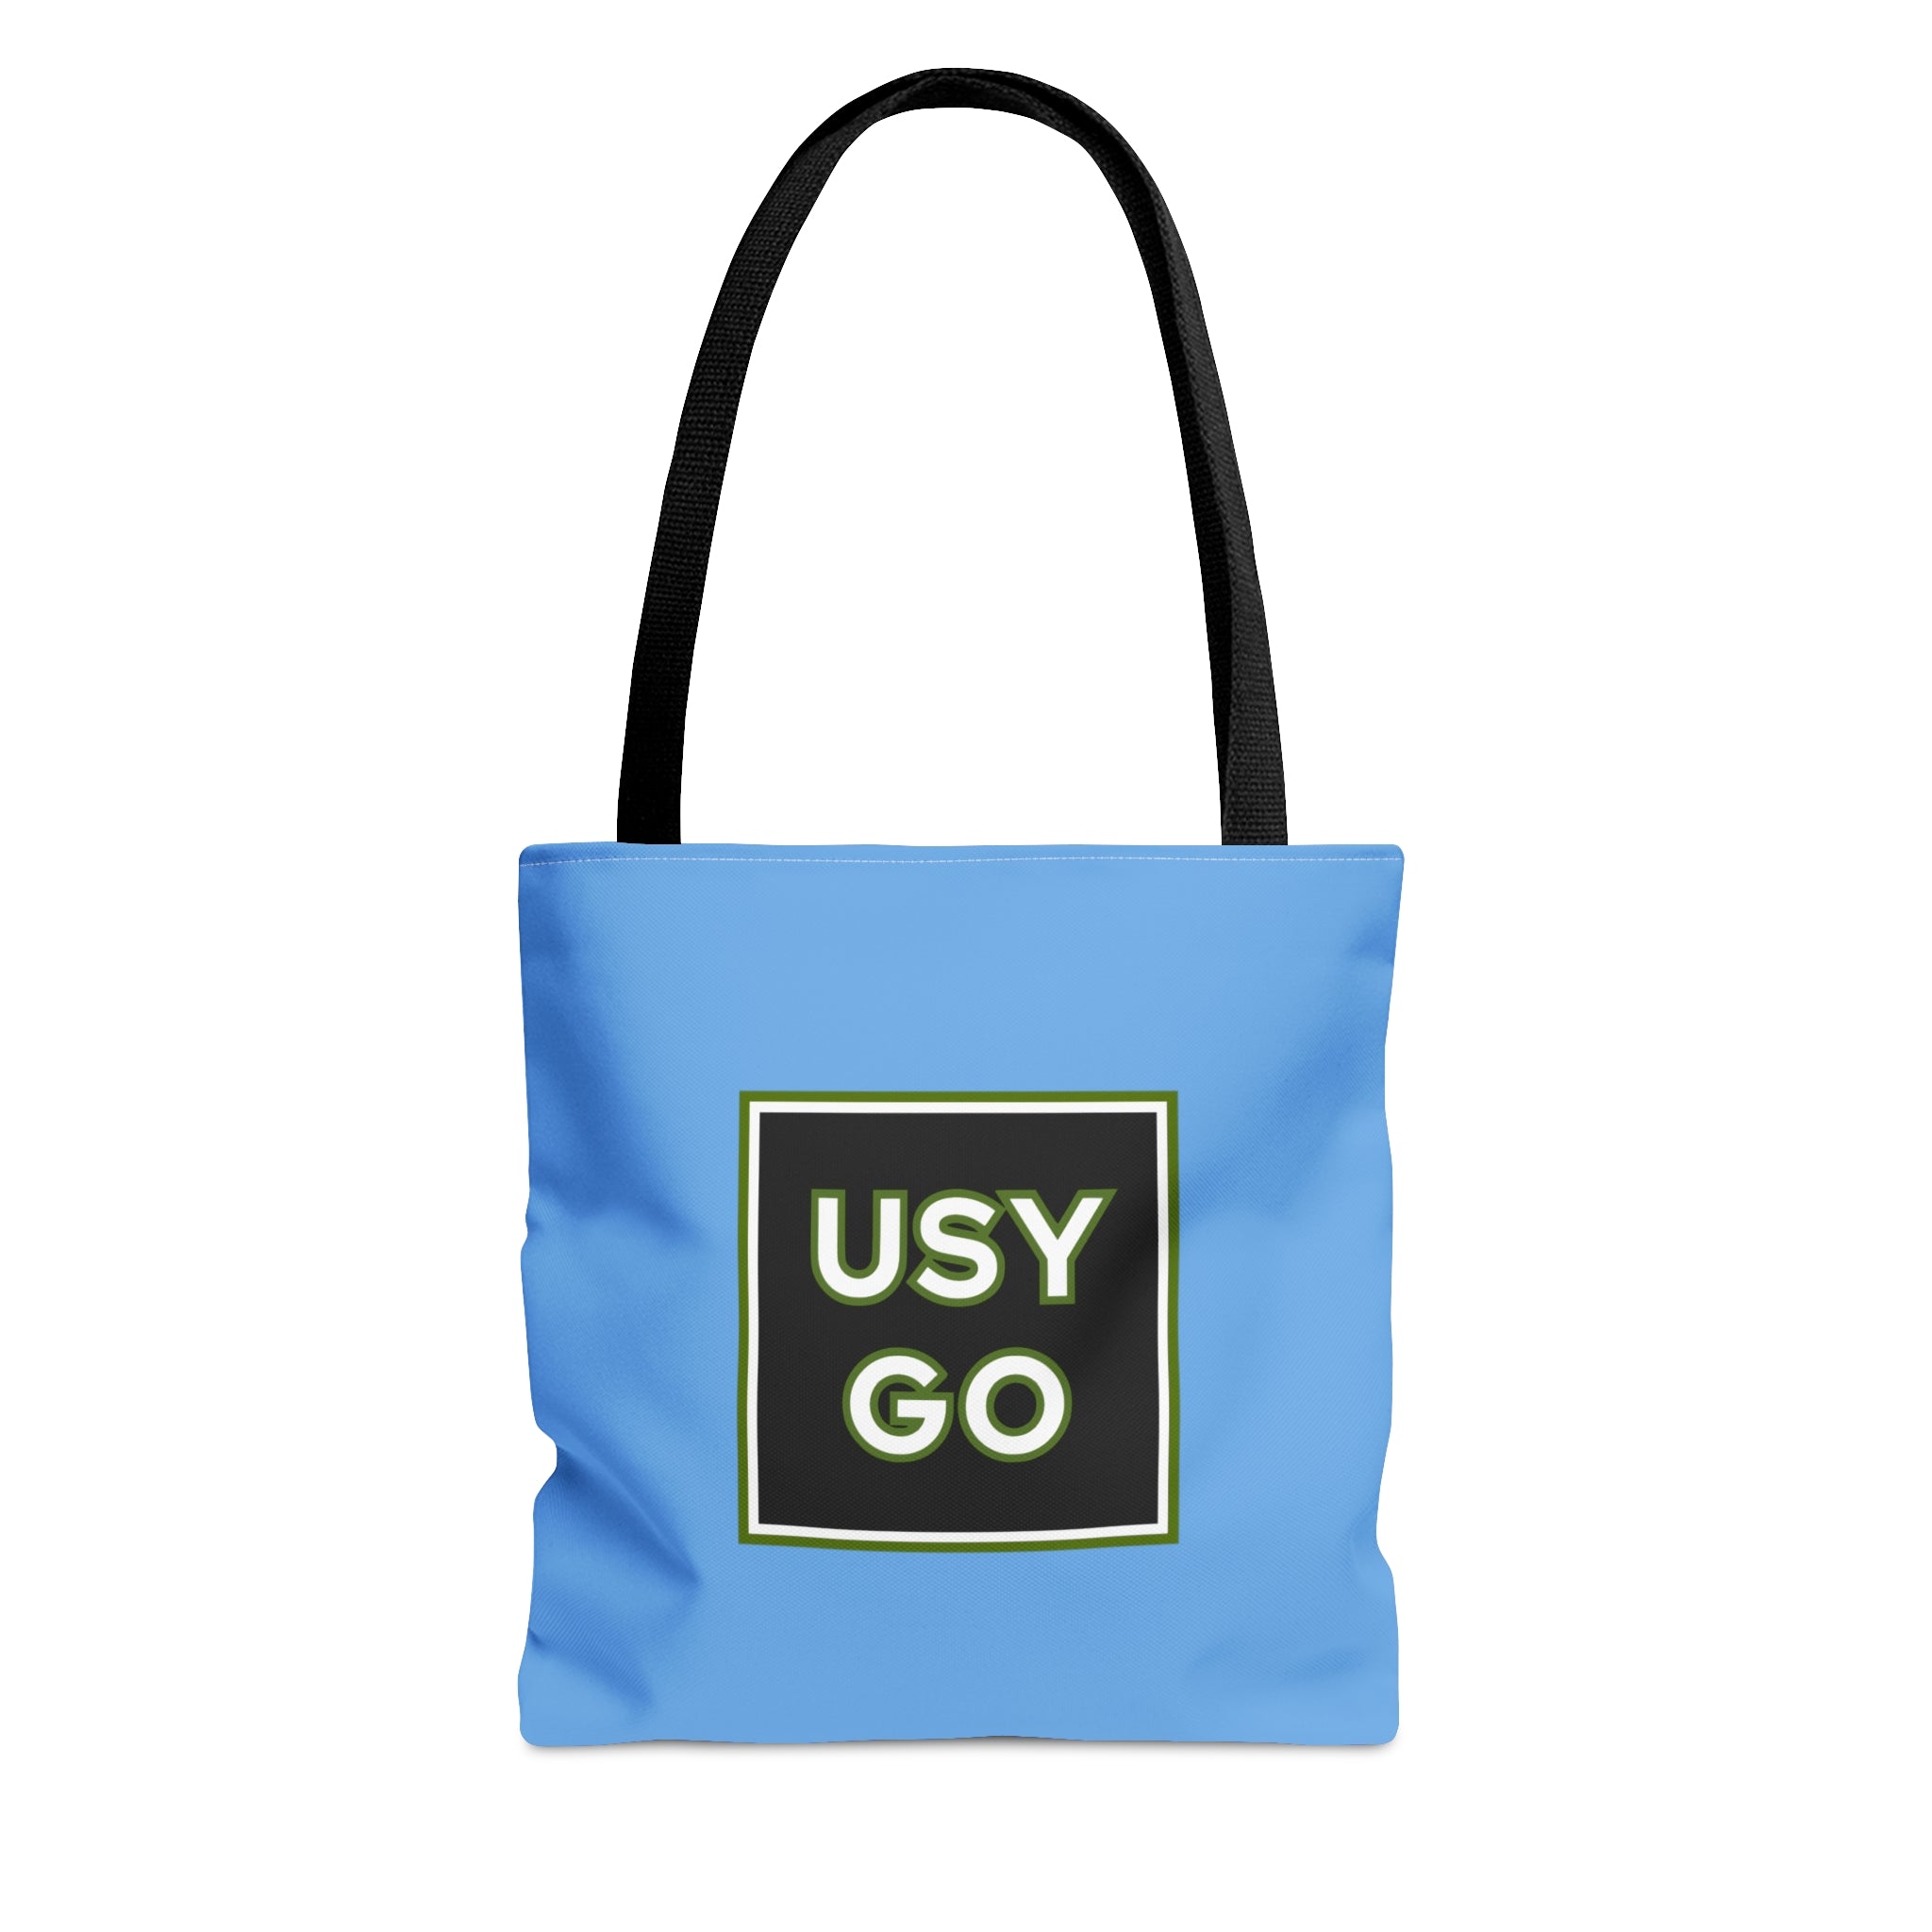 Light Blue USYGO Tote Bags in 3 Sizes